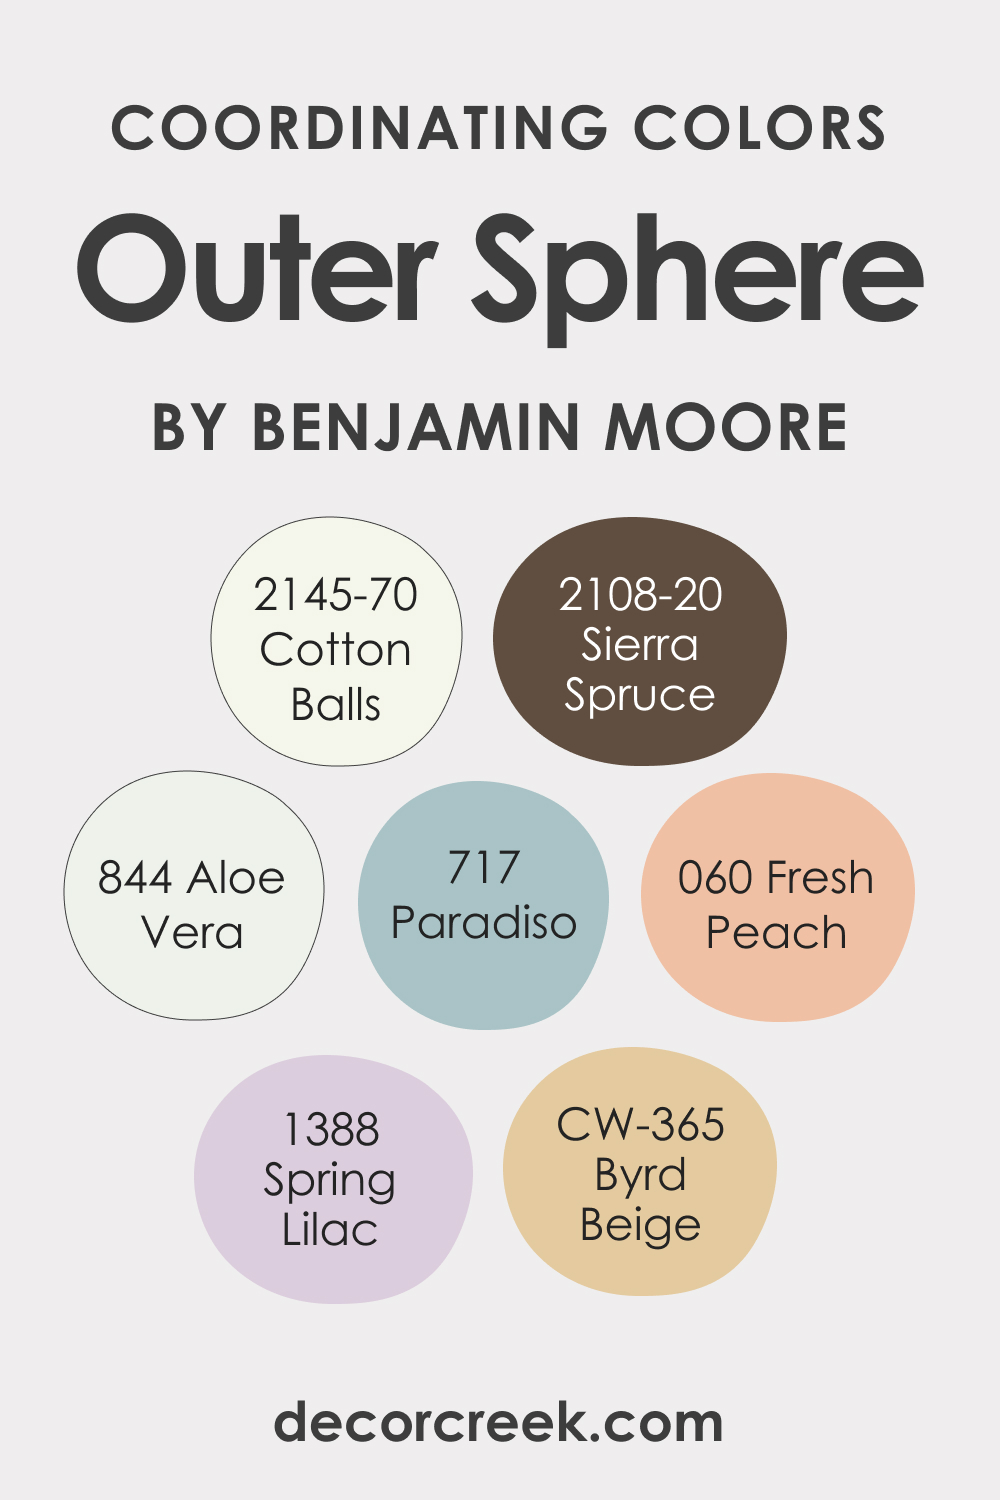 Coordinating Colors of Outer Sphere 645